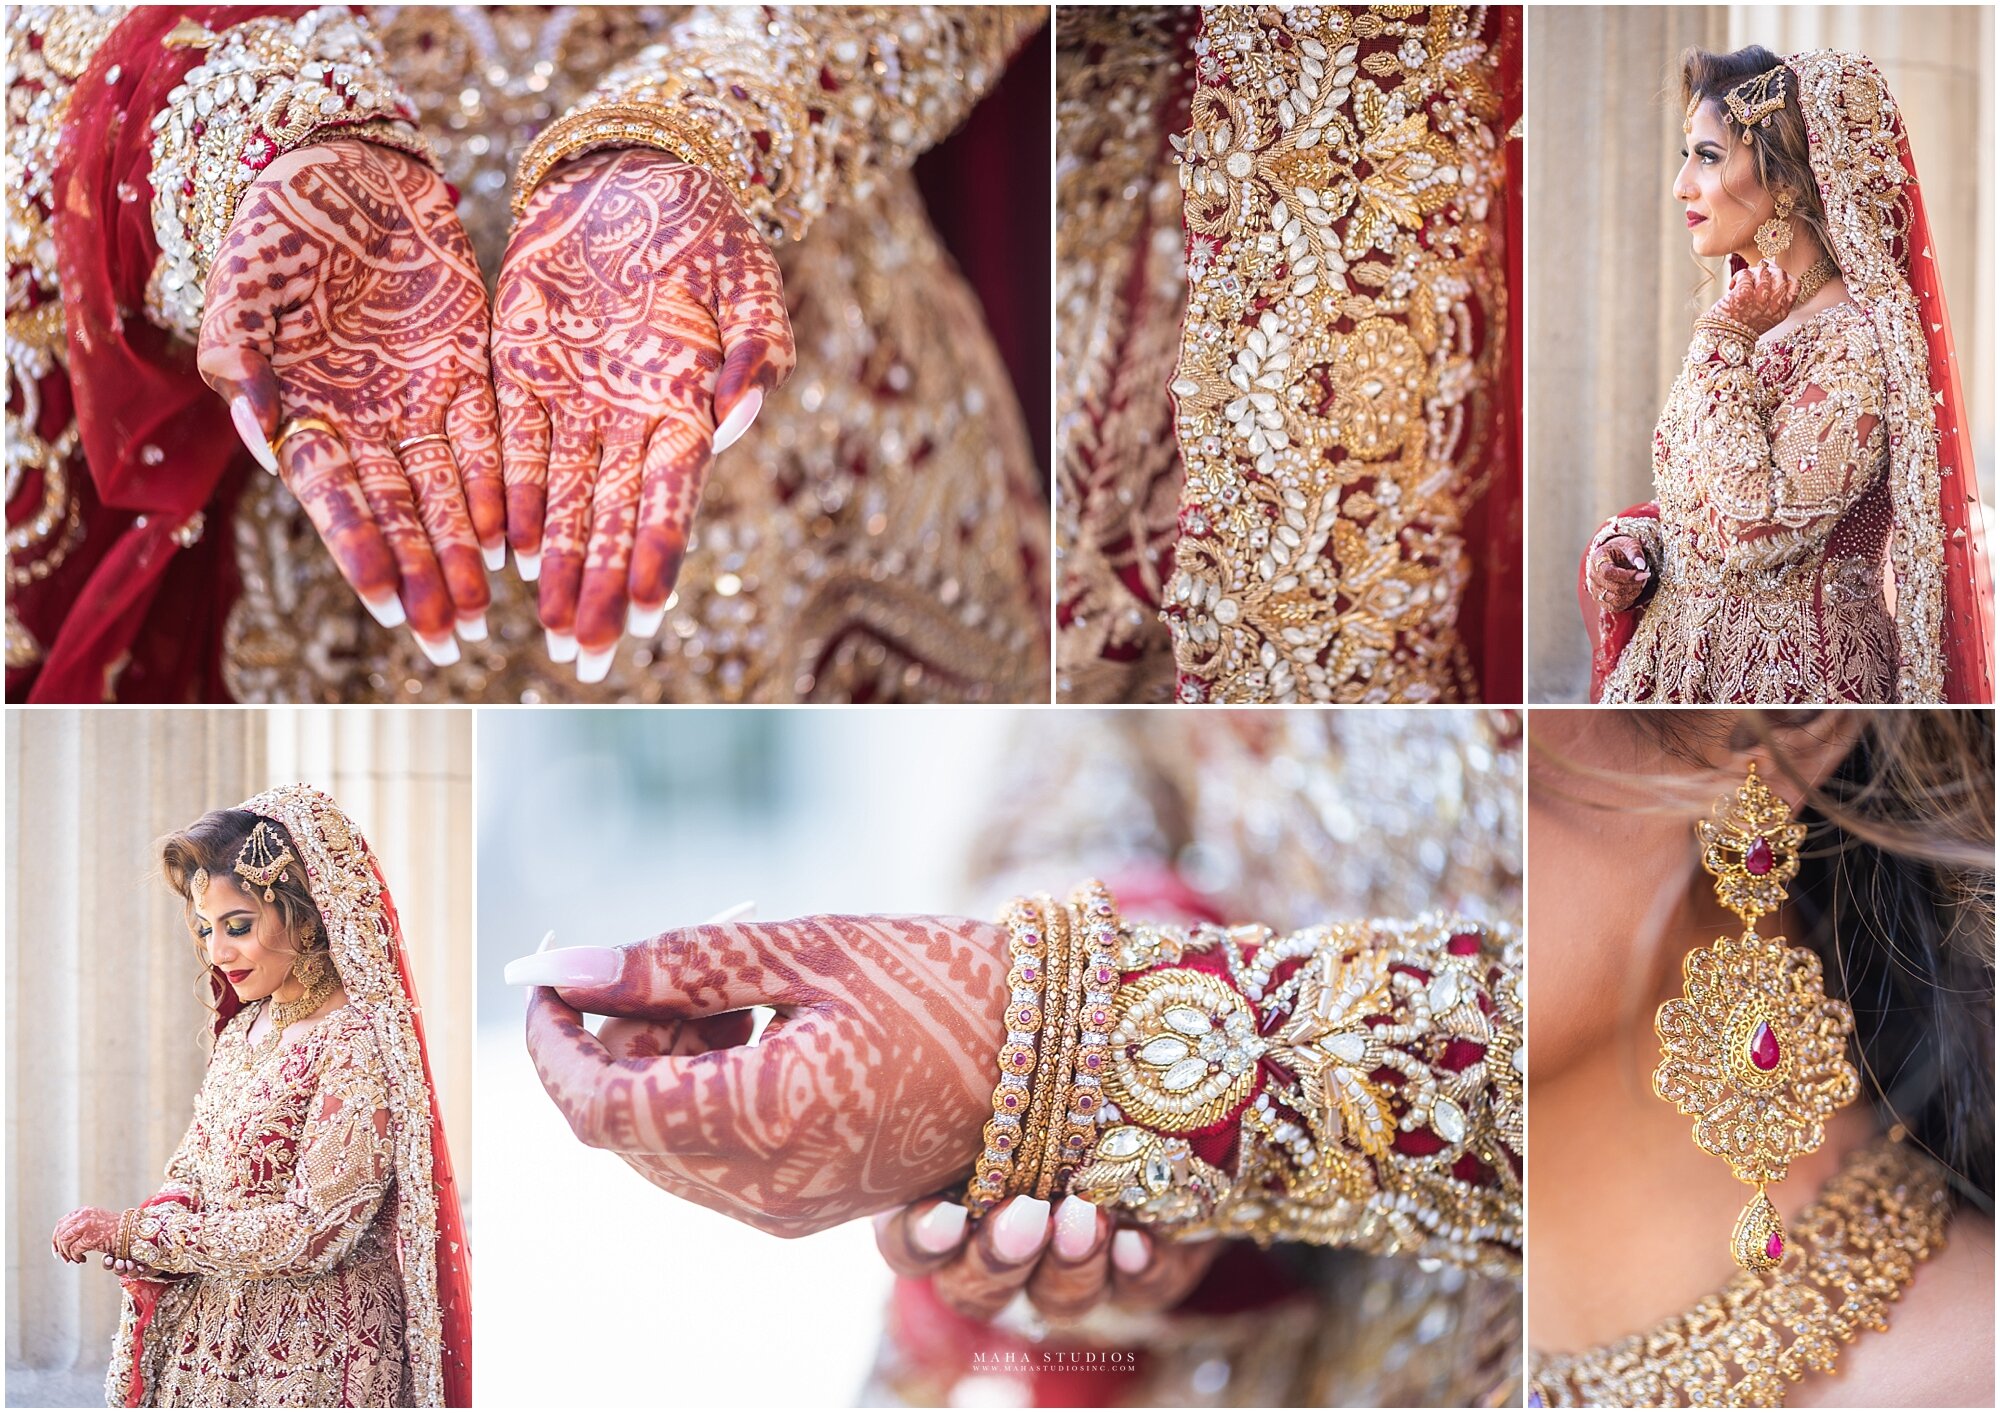 I loved the bridal details Tahreem chose for her outfit. They were classic and so beautifully crafted.